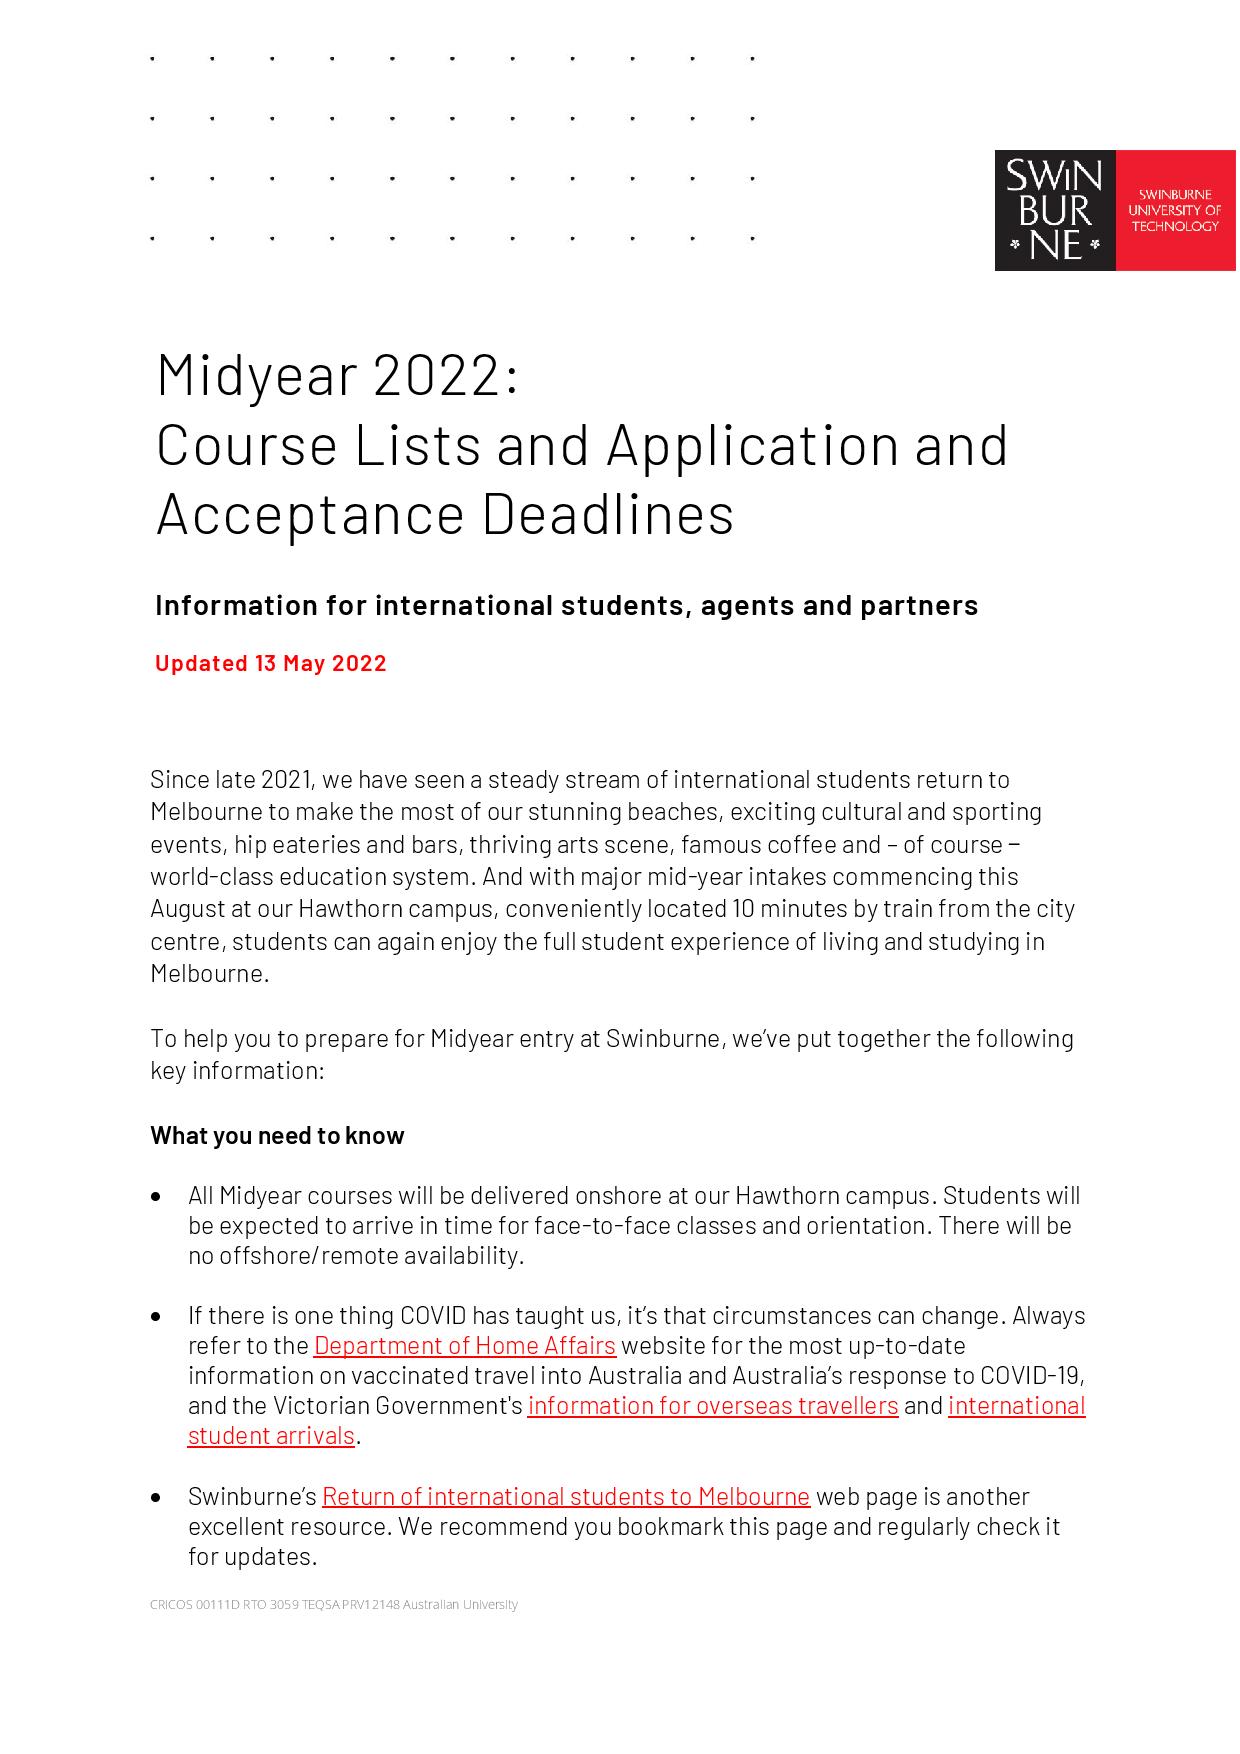 Application and acceptance dates for 2022 Midyear intakes - NEW